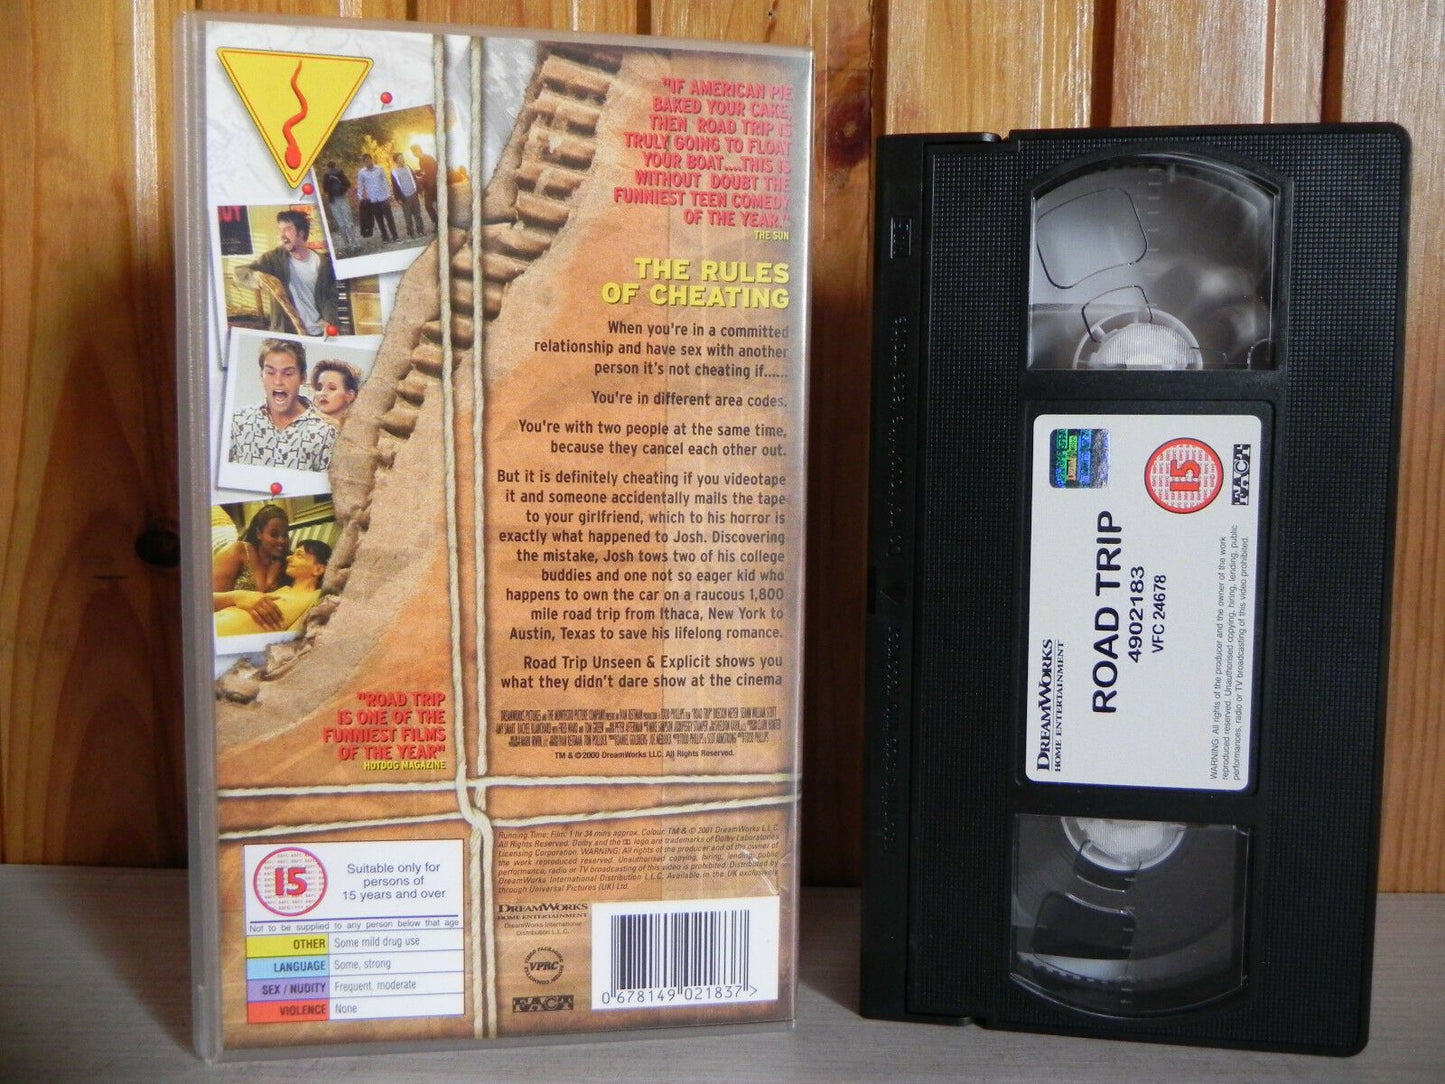 Road Trip - DreamWorks - Teens Comedy - Unseen & Explicit - Amy Smart - Pal VHS-